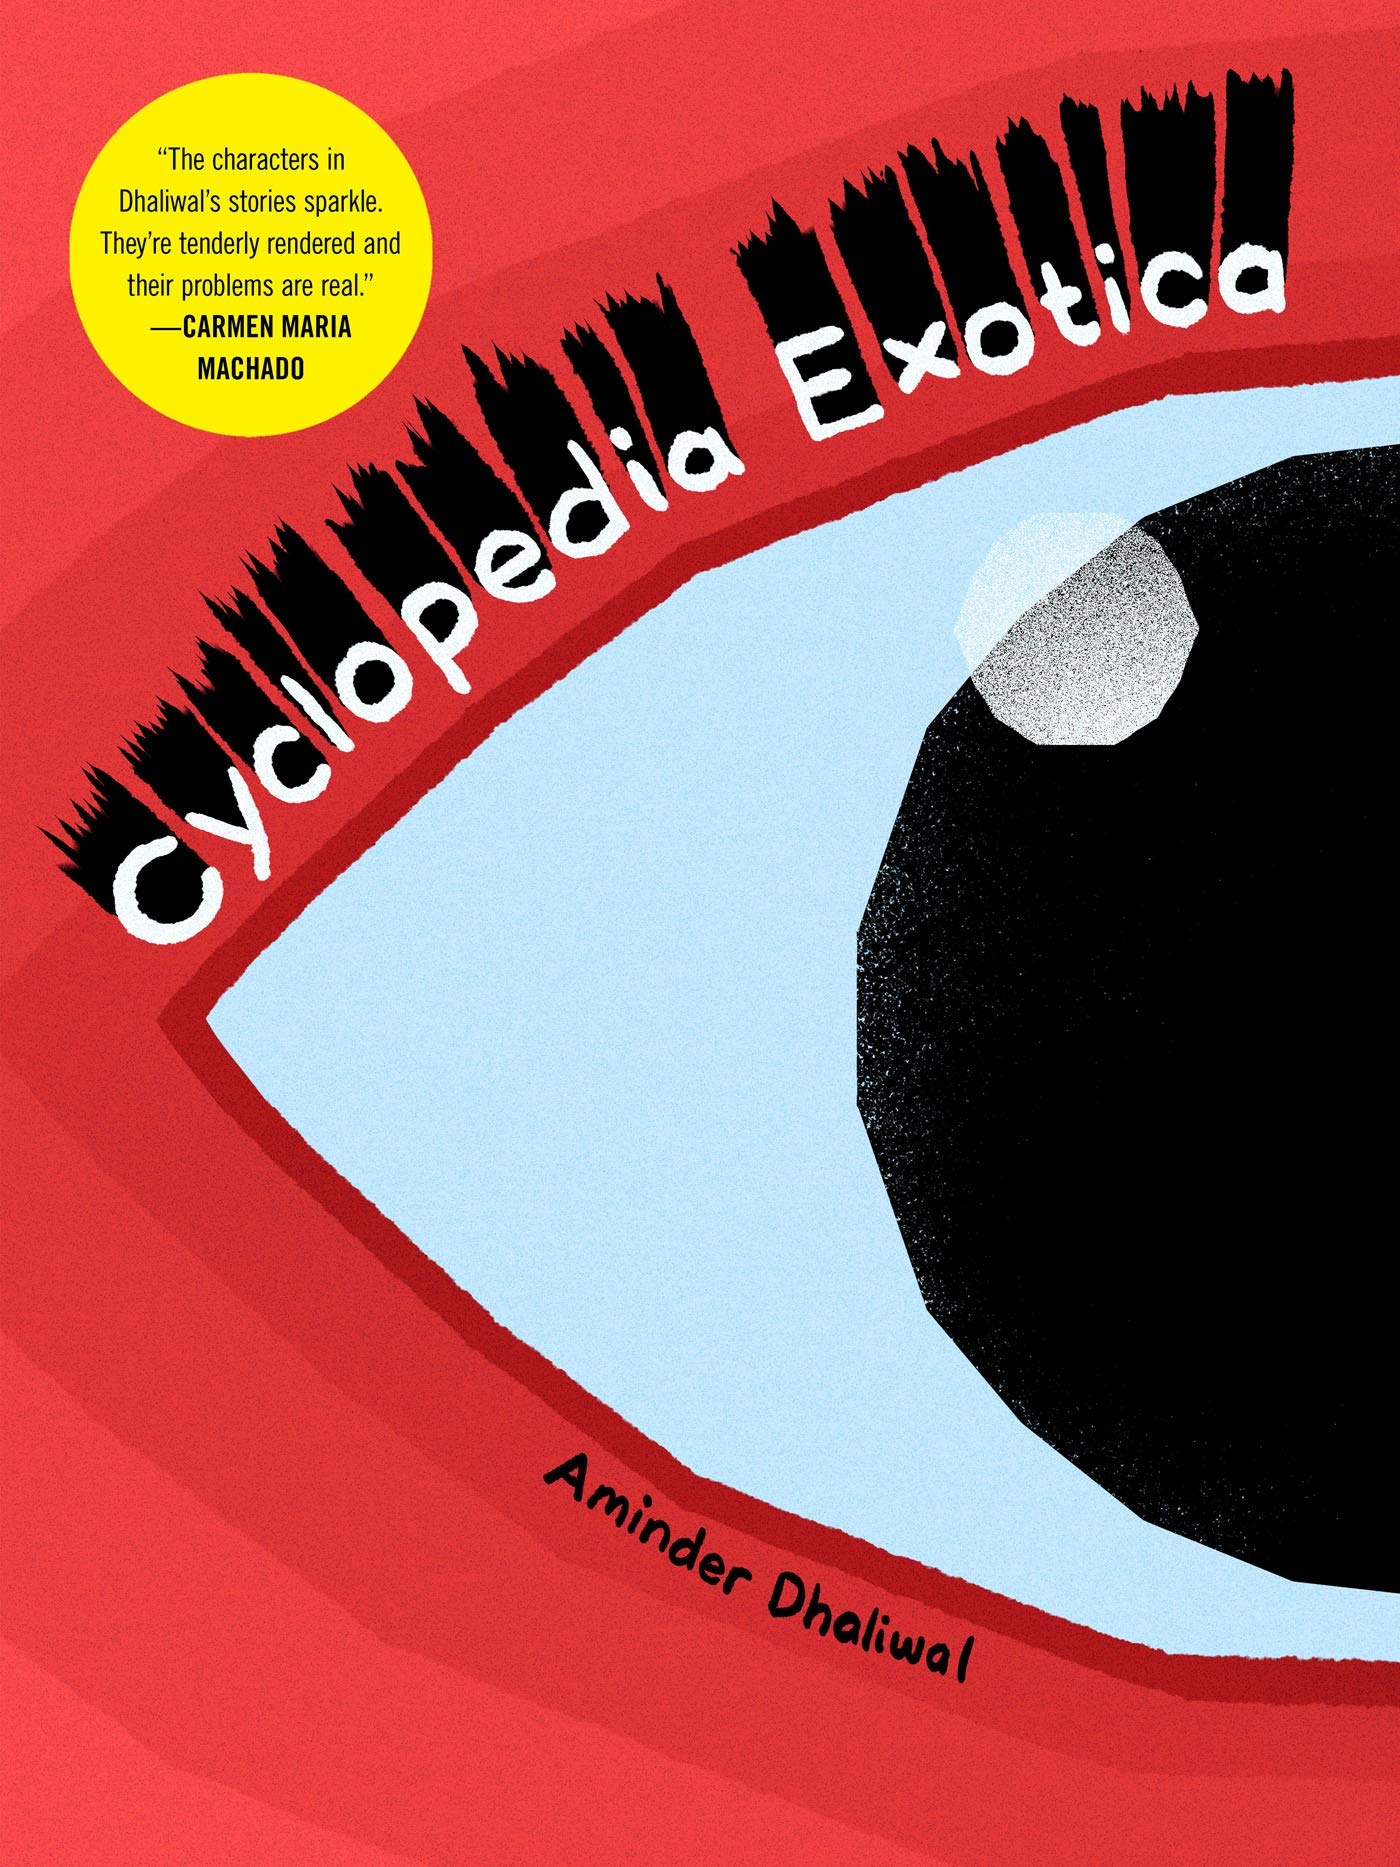 'Cyclopedia Exotica' pokes fun at some very real frustrations